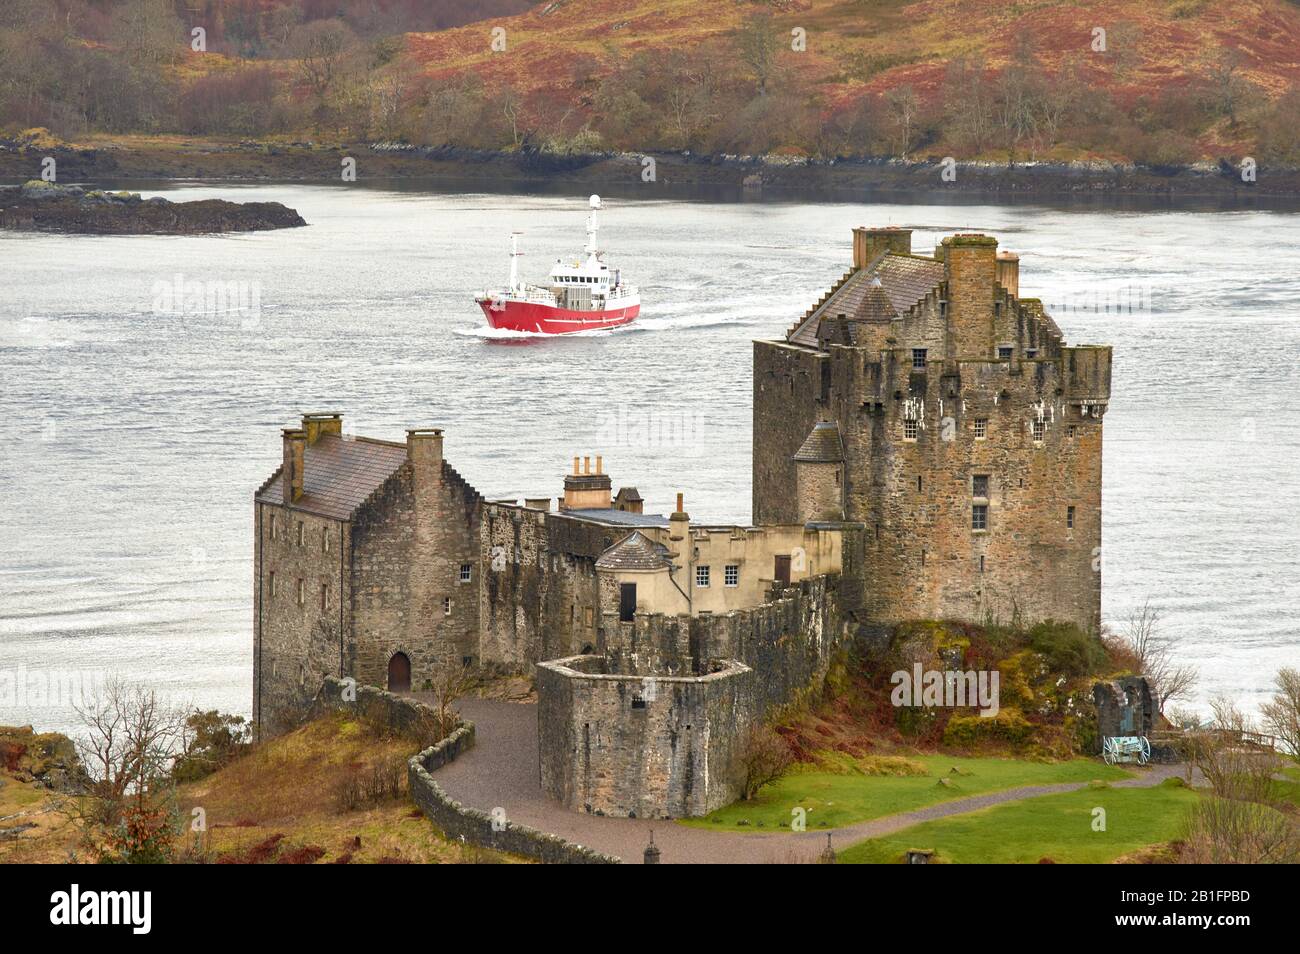 EILEAN DONAN CASTLE LOCH DUICH DORNIE SCOTLAND WINTER THE CASTLE OVERLOOKING THE WATERS OF THE LOCH WITH A RED BOAT Stock Photo